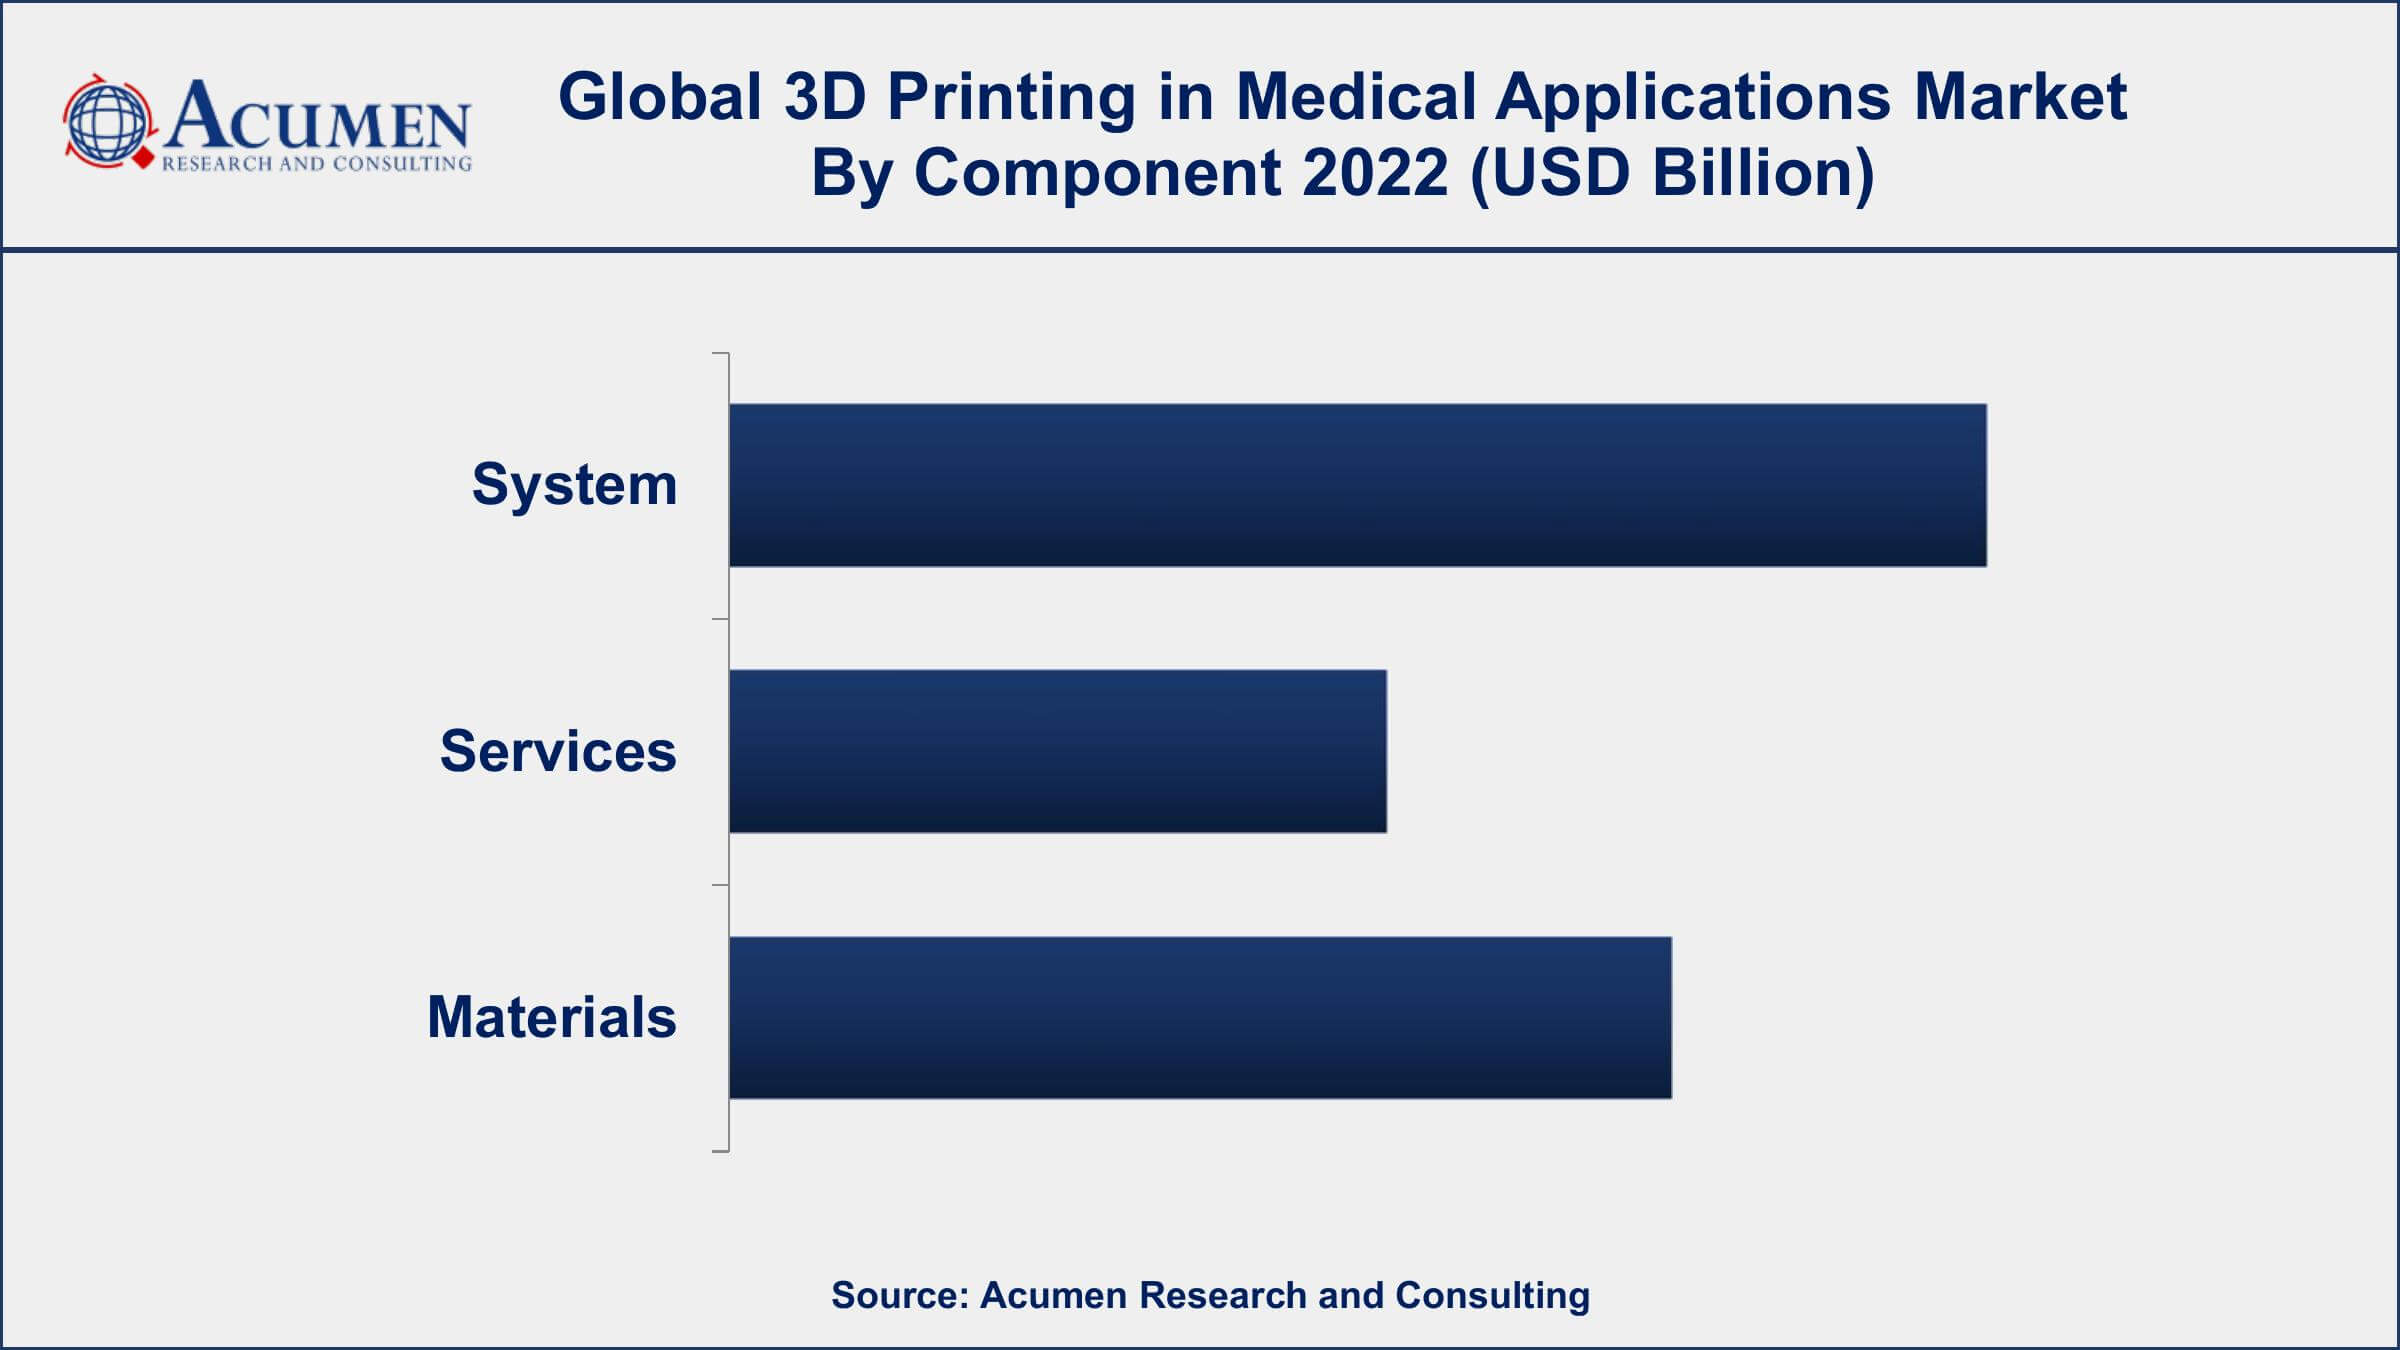 3D Printing in Medical Applications Market Opportunities